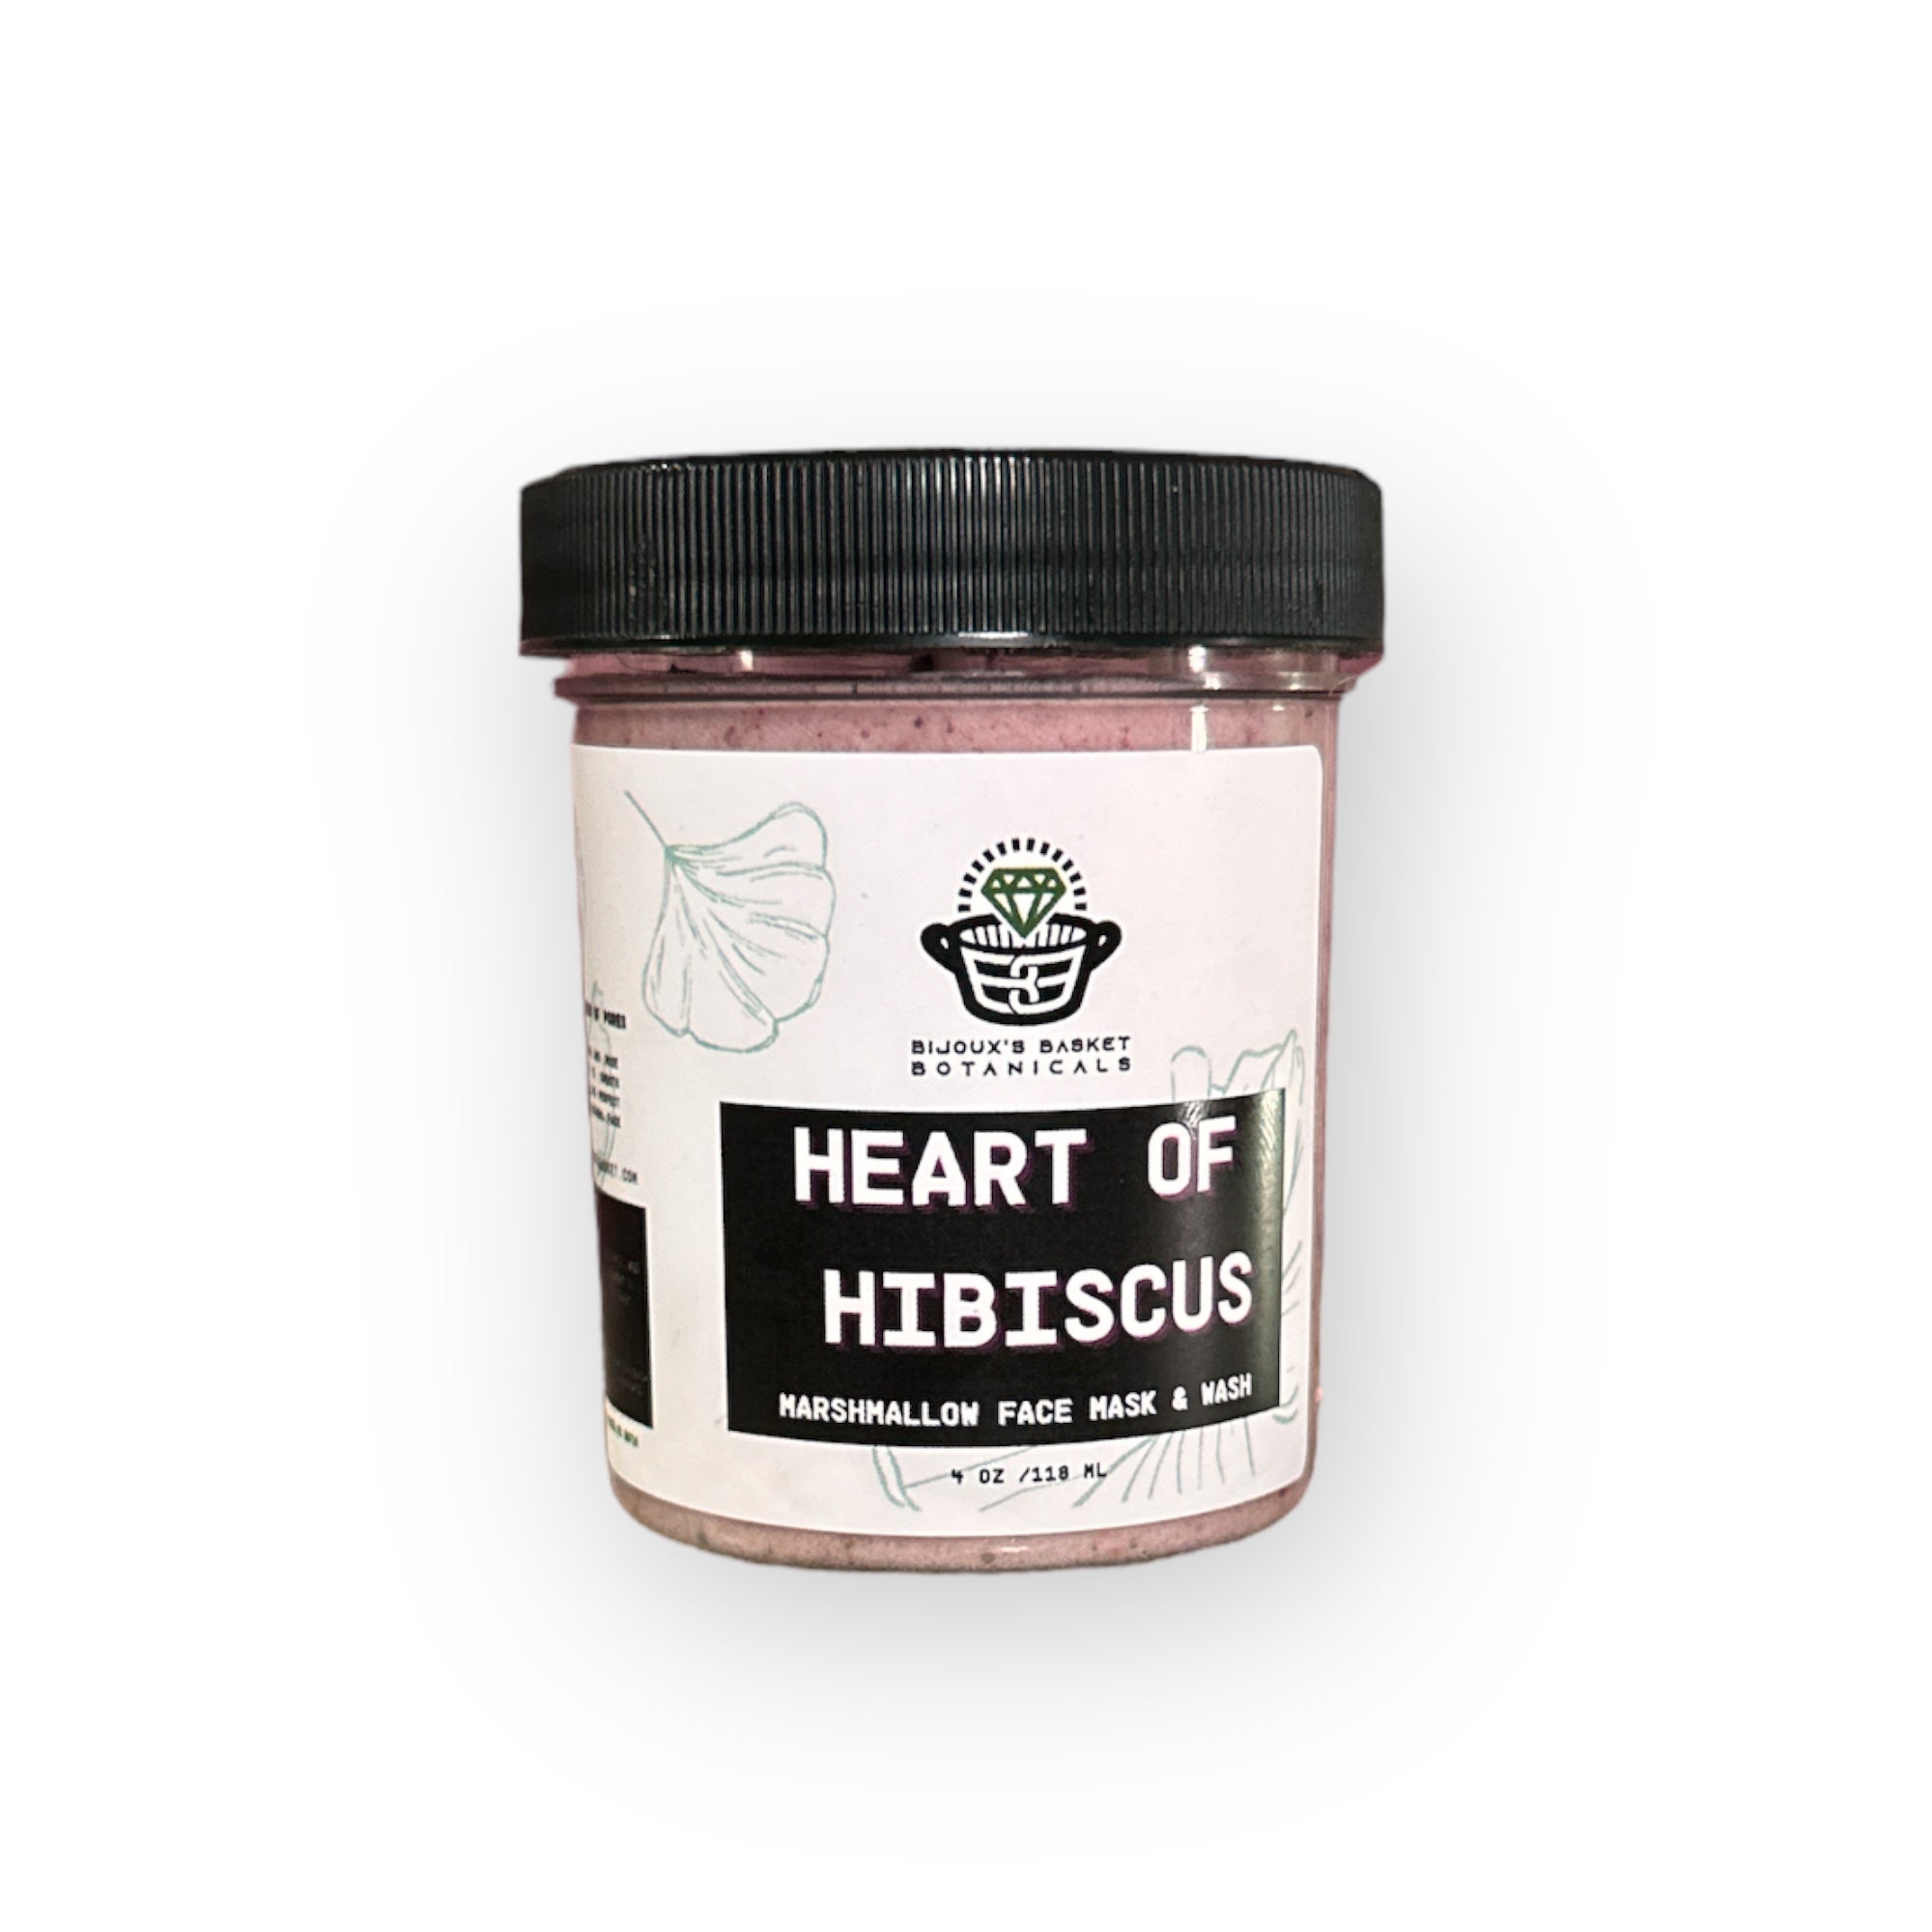 Heart of Hibiscus 2-in-1 Face Mask & Wash